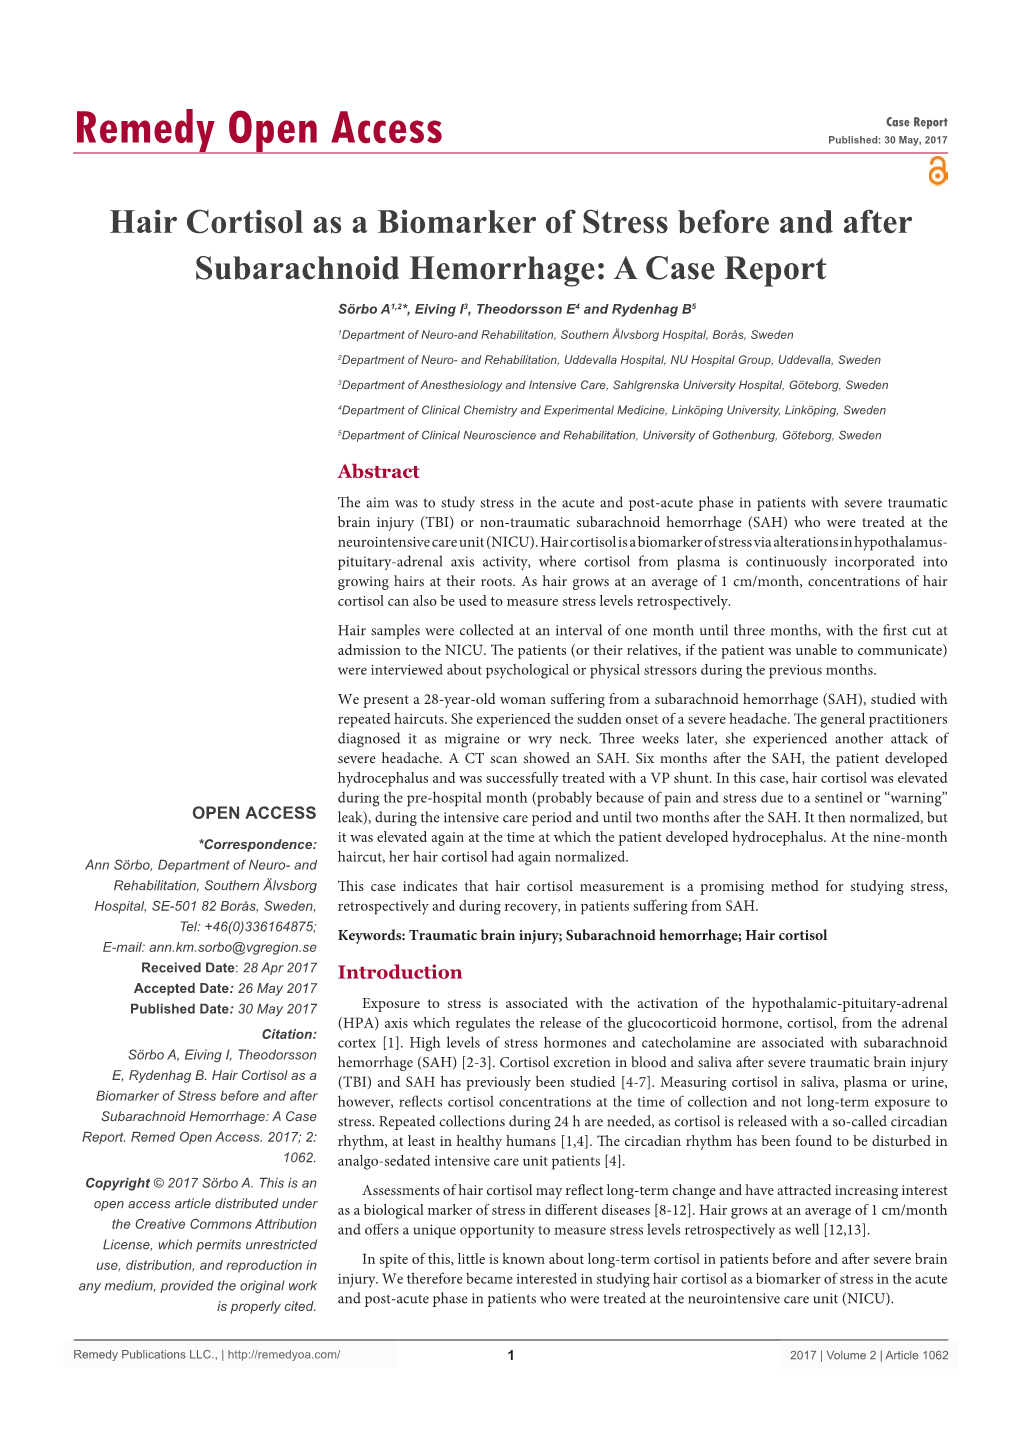 Hair Cortisol As a Biomarker of Stress Before and After Subarachnoid Hemorrhage: a Case Report